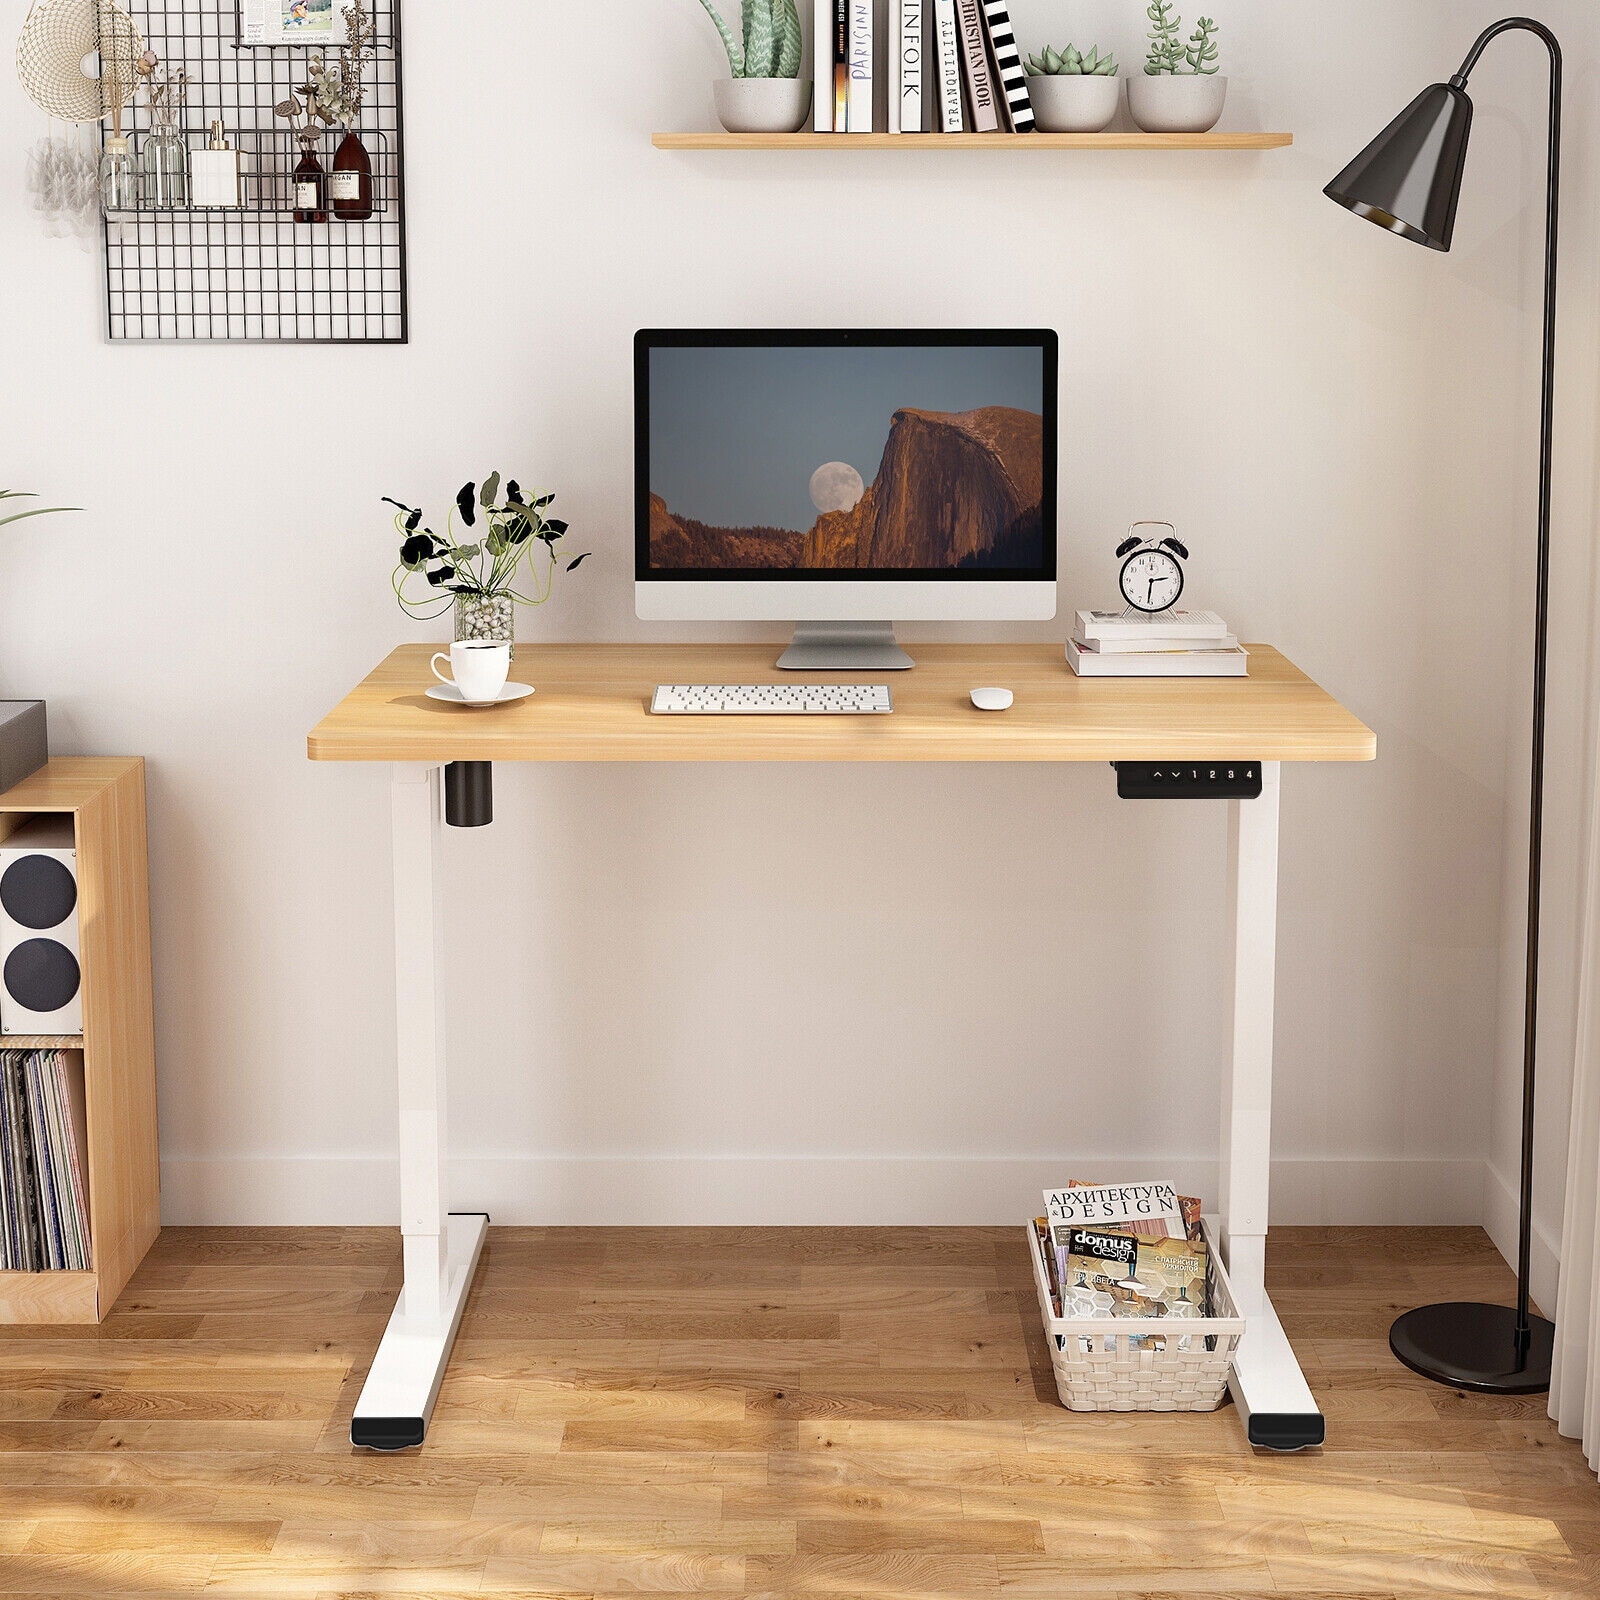 FLEXISPOT Height Adjustable Desk 40 x 24 Inches Small Desk Whole-Piece Desk  Board Electric Sit Stand Desk Home Office Table Standing Desk (Classic